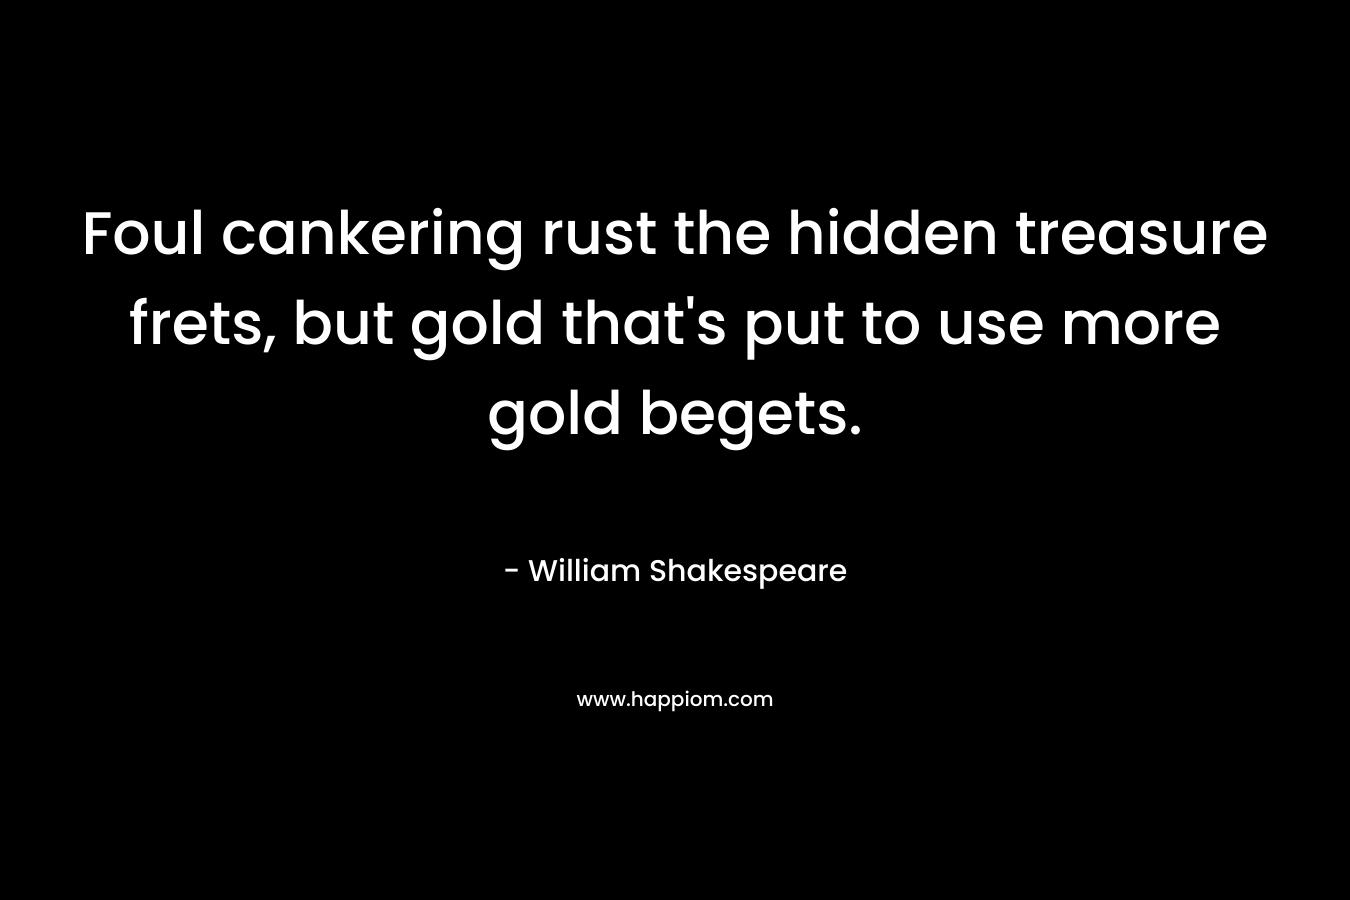 Foul cankering rust the hidden treasure frets, but gold that’s put to use more gold begets. – William Shakespeare